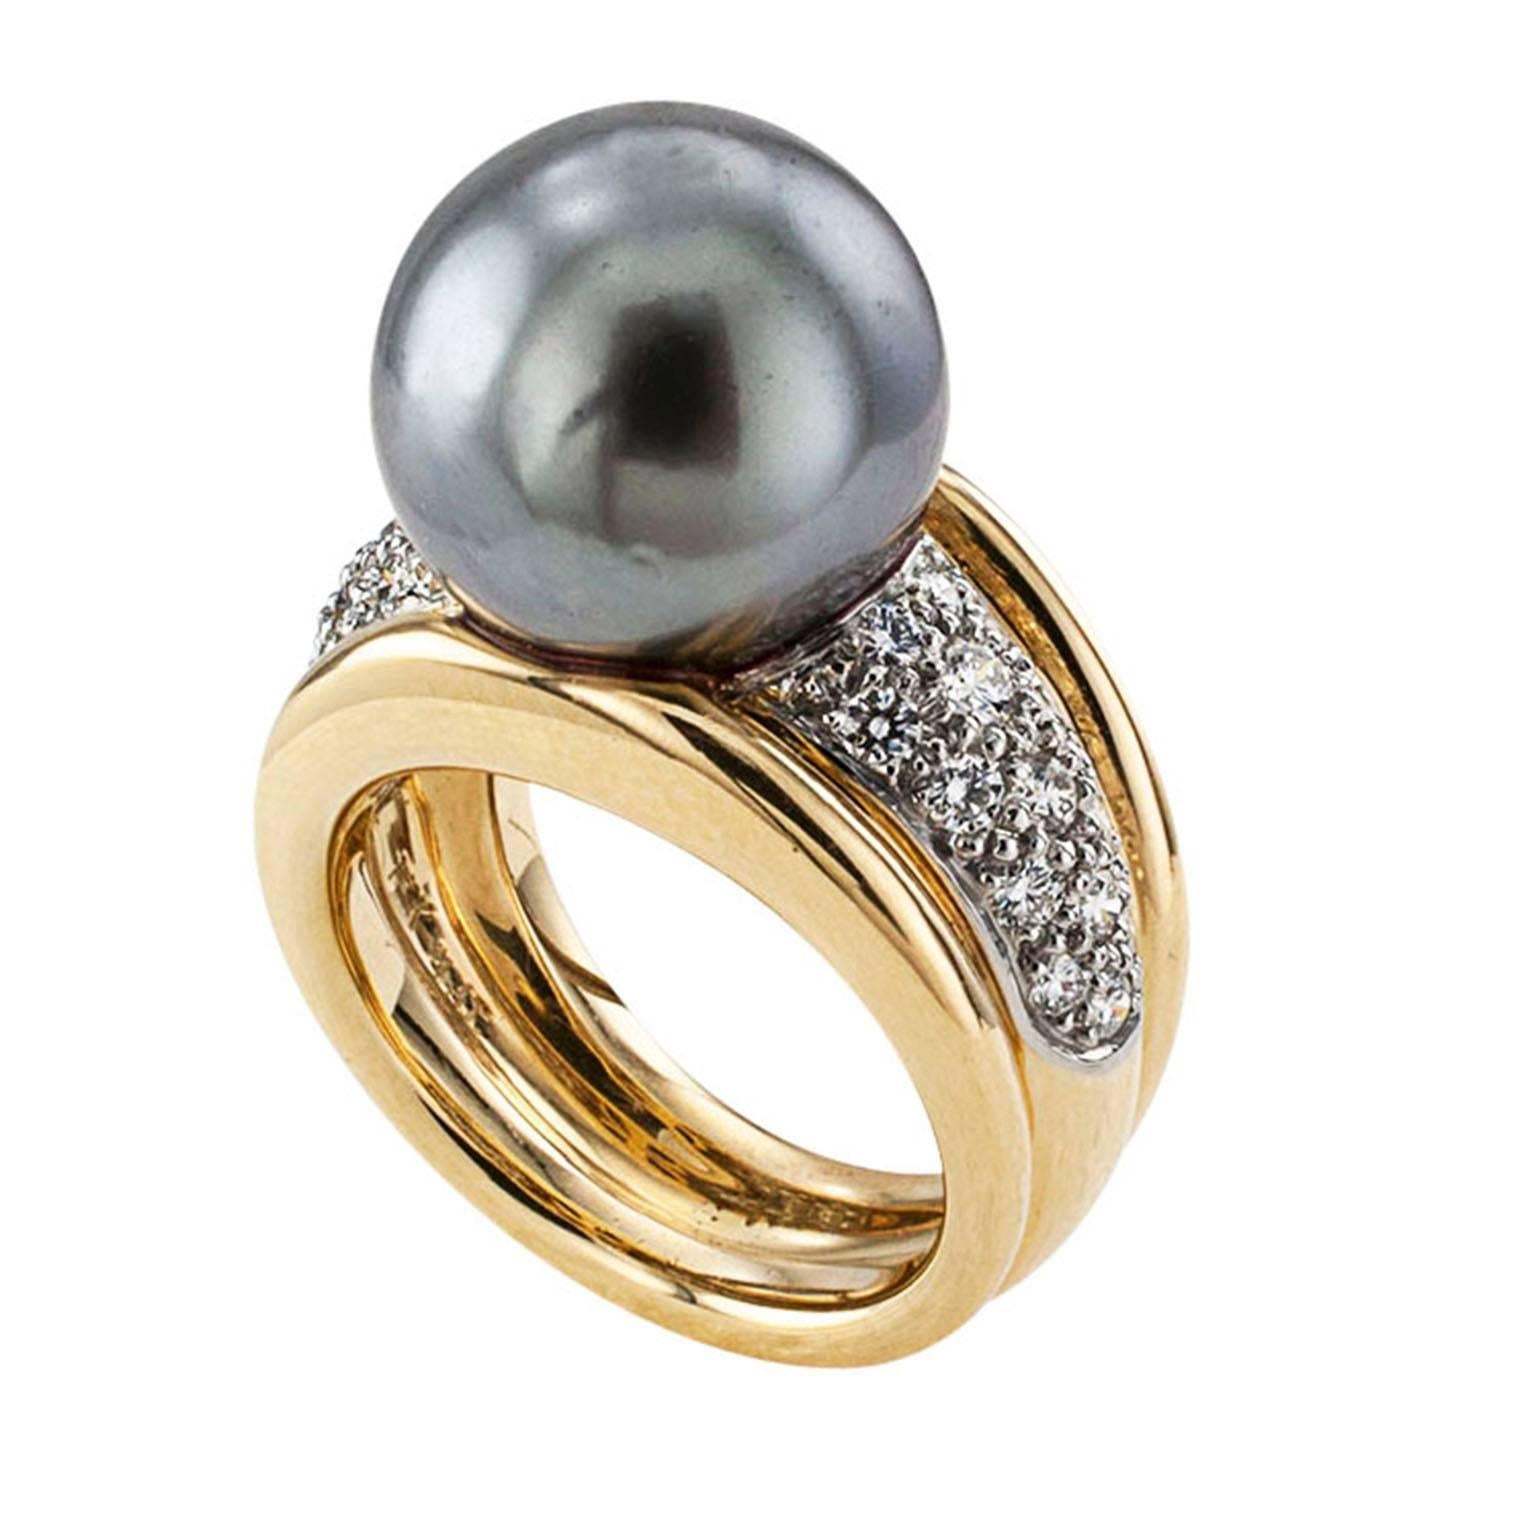 Tahitian Cultured Pearl and Diamond Cocktail Ring

Twenty-eight radiant diamonds set the stage to glamorize the luscious 13 mm Tahitian cultured pearl that dominates this exotic and sensuous ring crafted in 18 karat yellow gold and platinum.  The